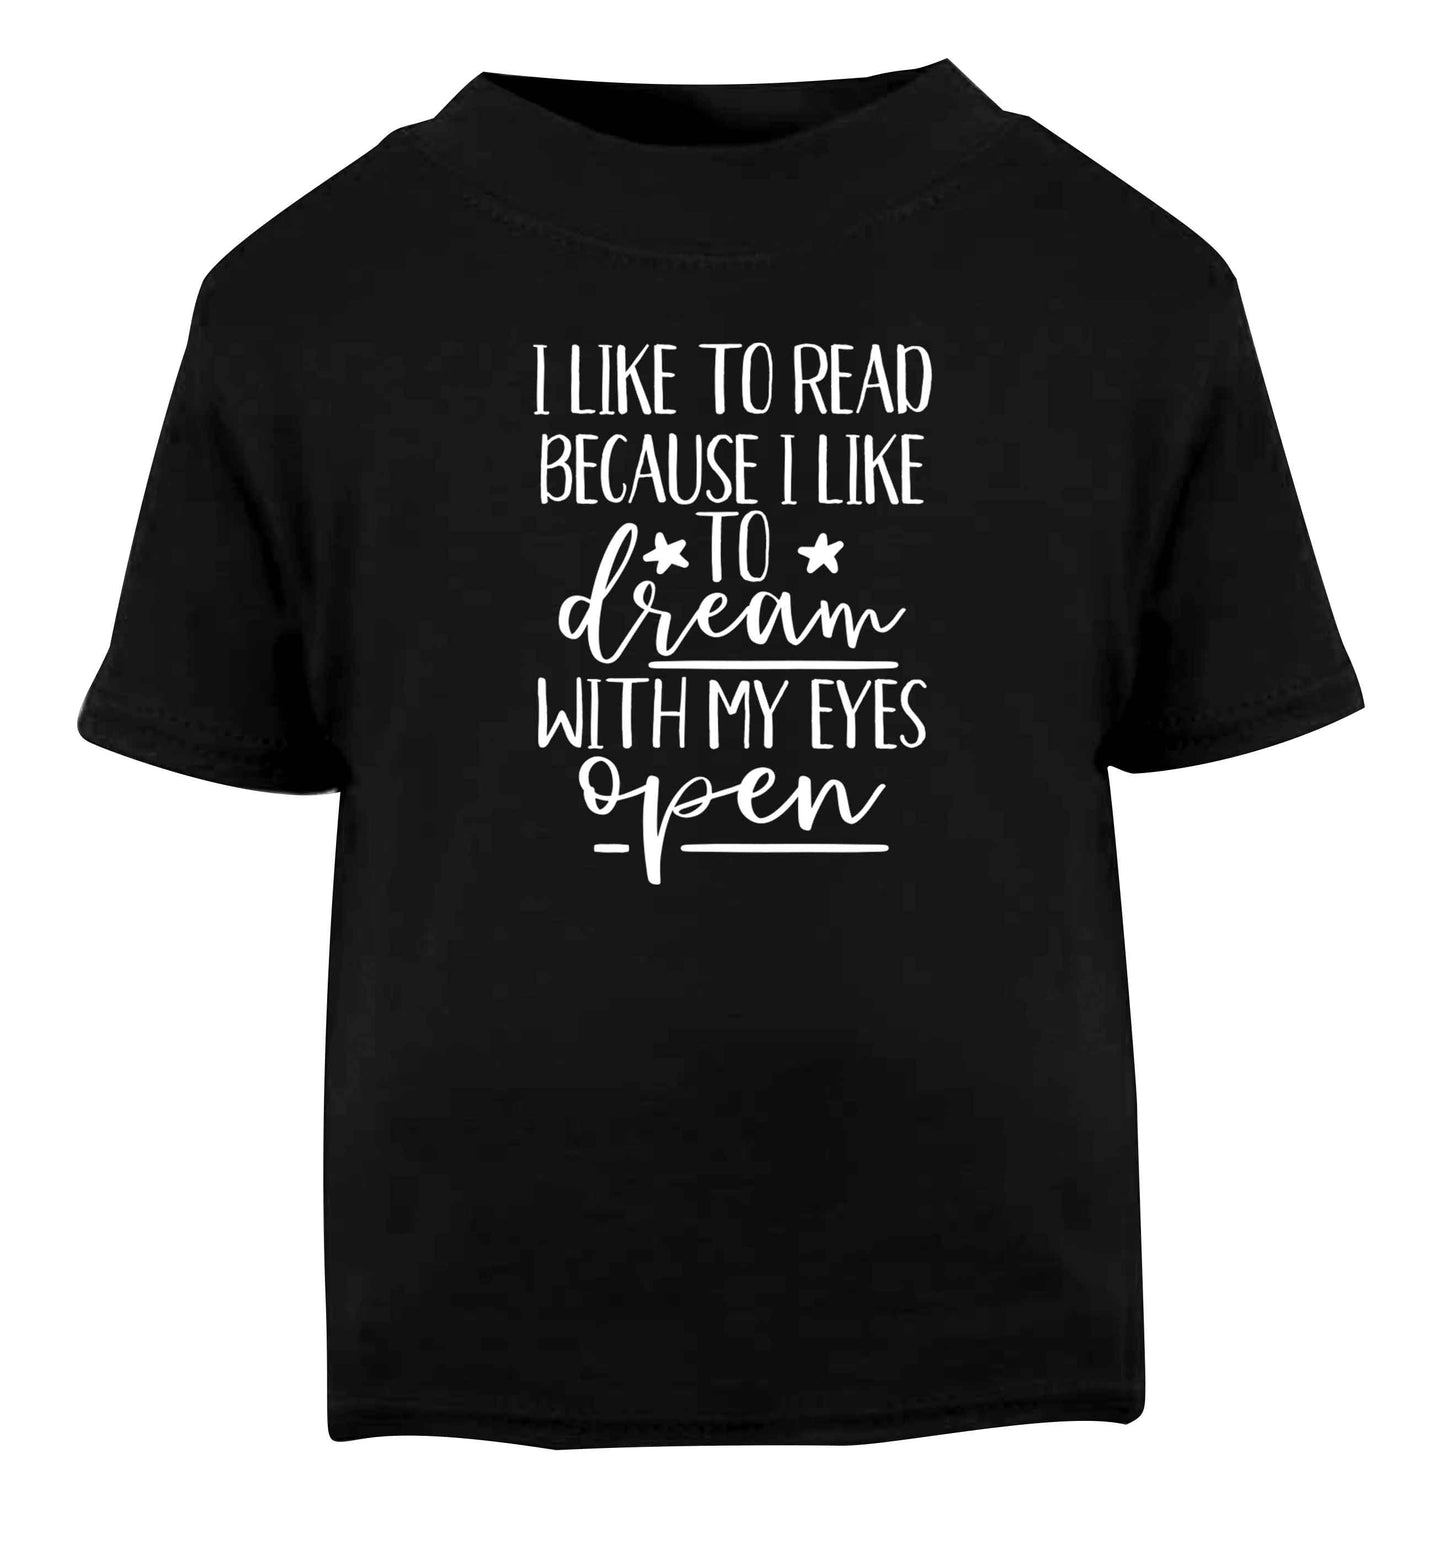 I like to read because I like to dream with my eyes open Black Baby Toddler Tshirt 2 years